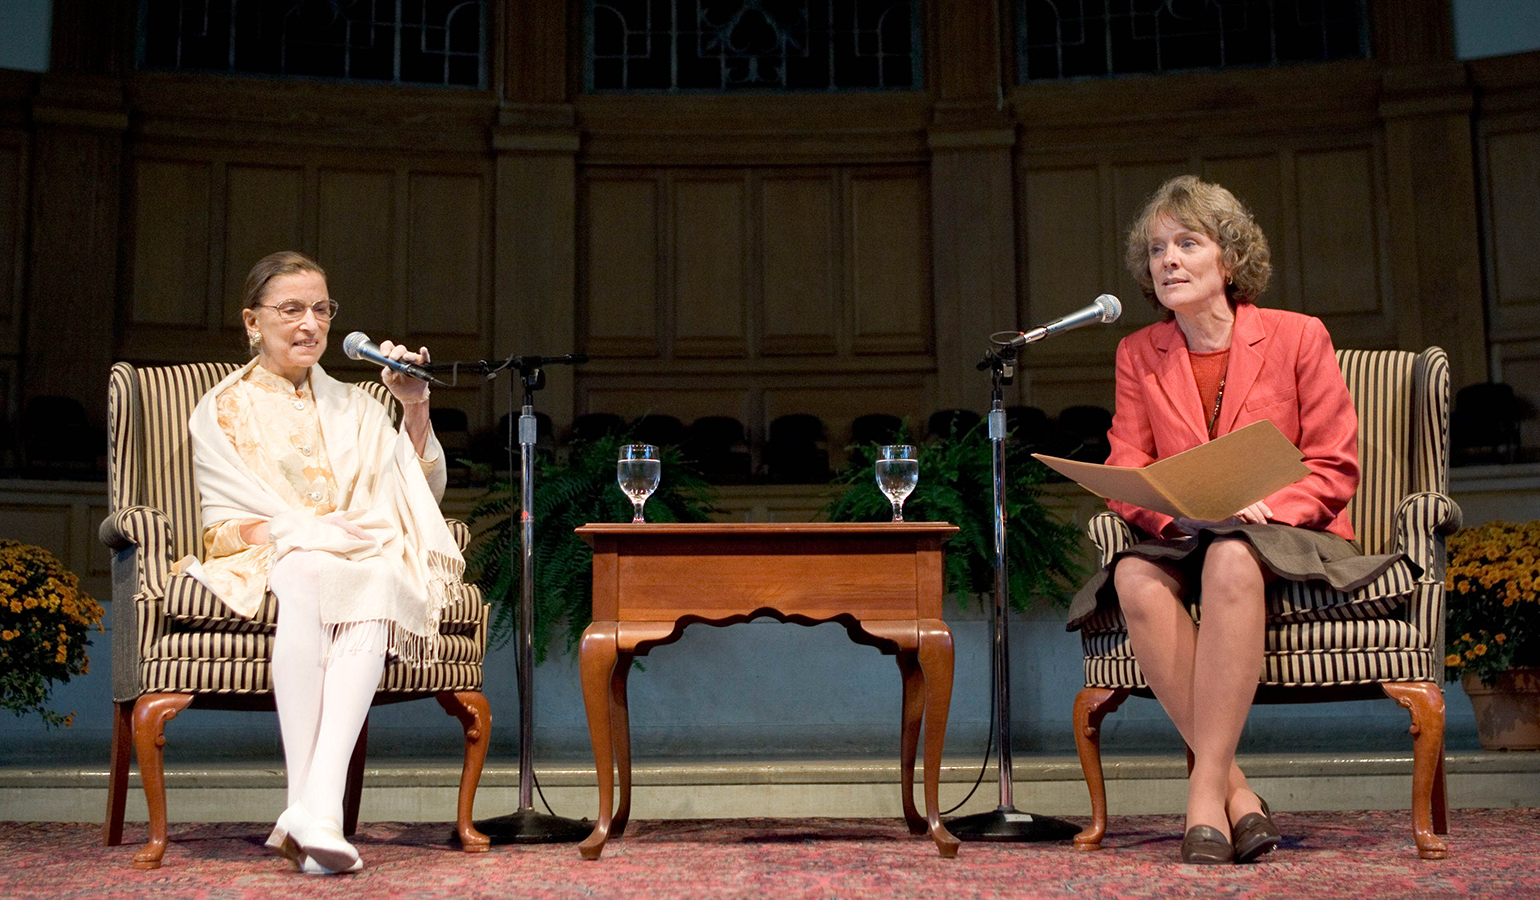 Supreme Court Justice Ruth Bader Ginsburg and Suzanne Reynolds (JD ’77) have a conversation at Wait Chapel.